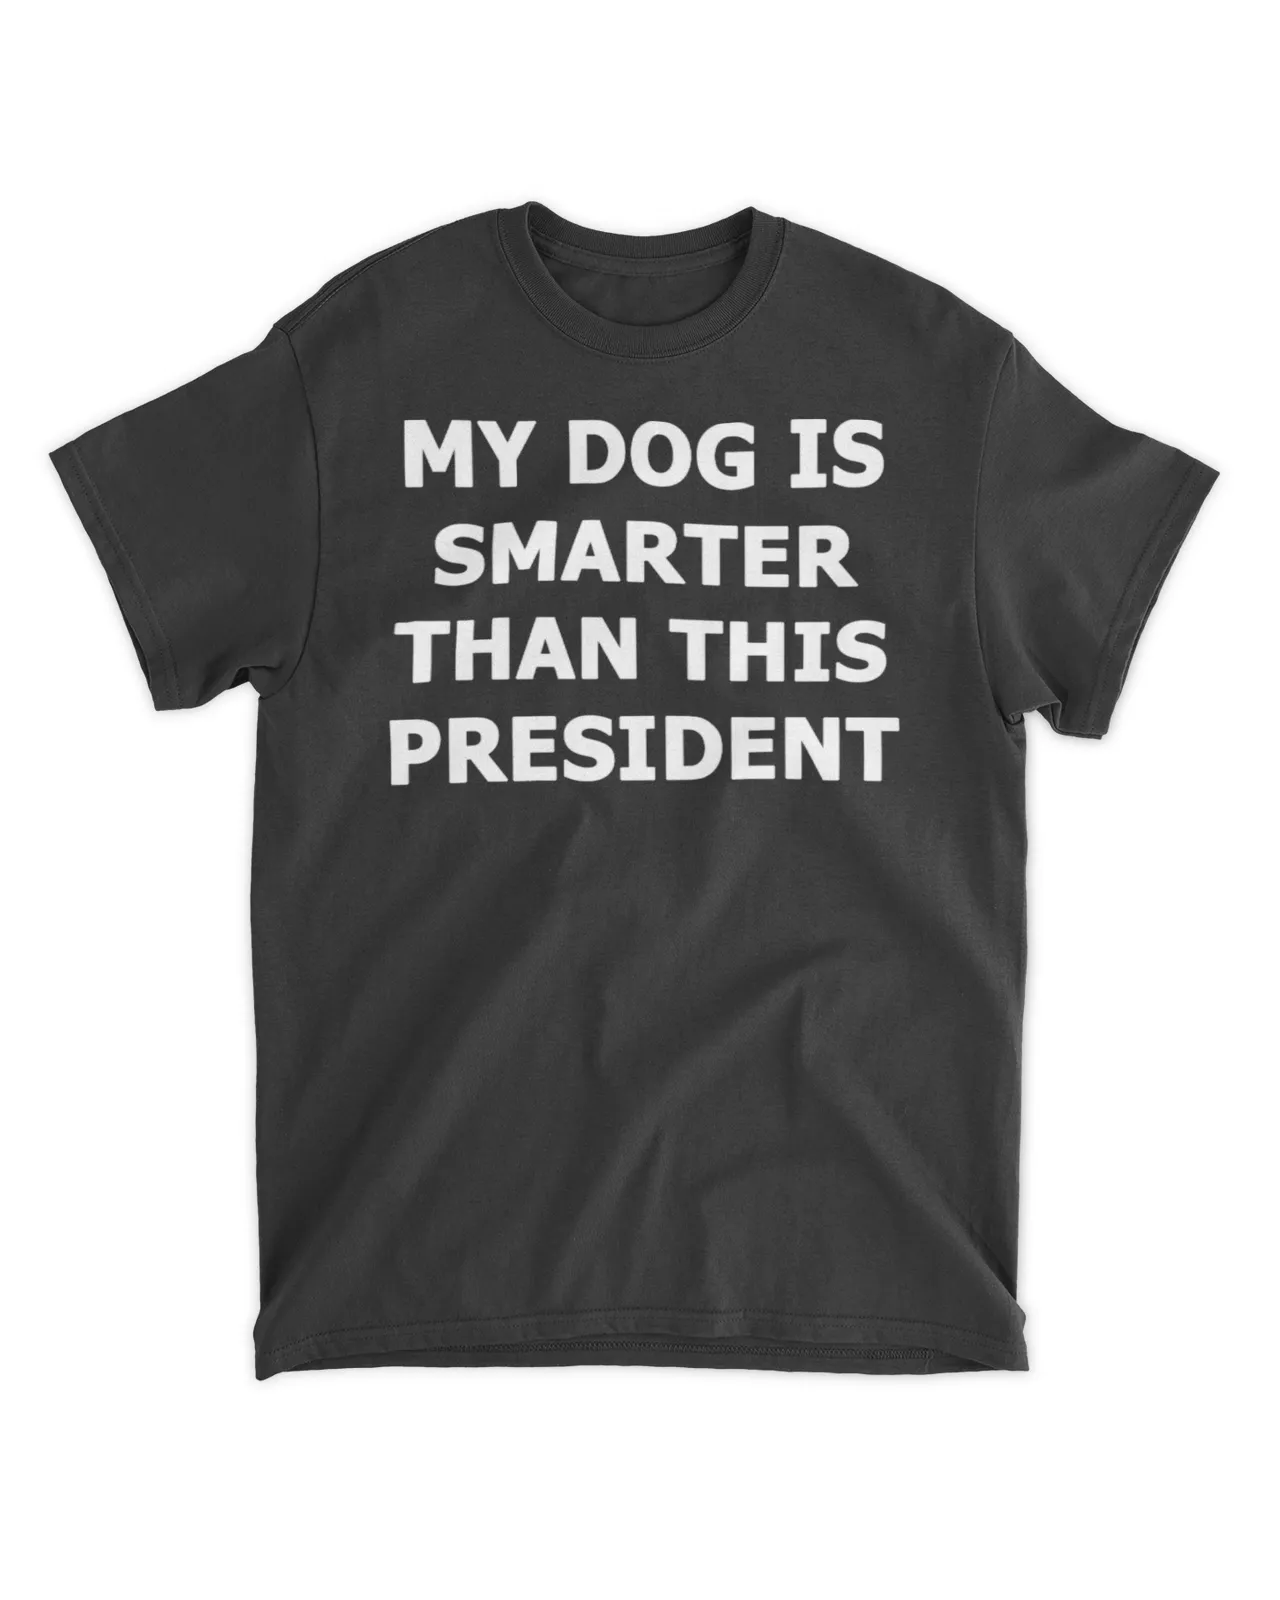  My dog is smarter than this president shirt